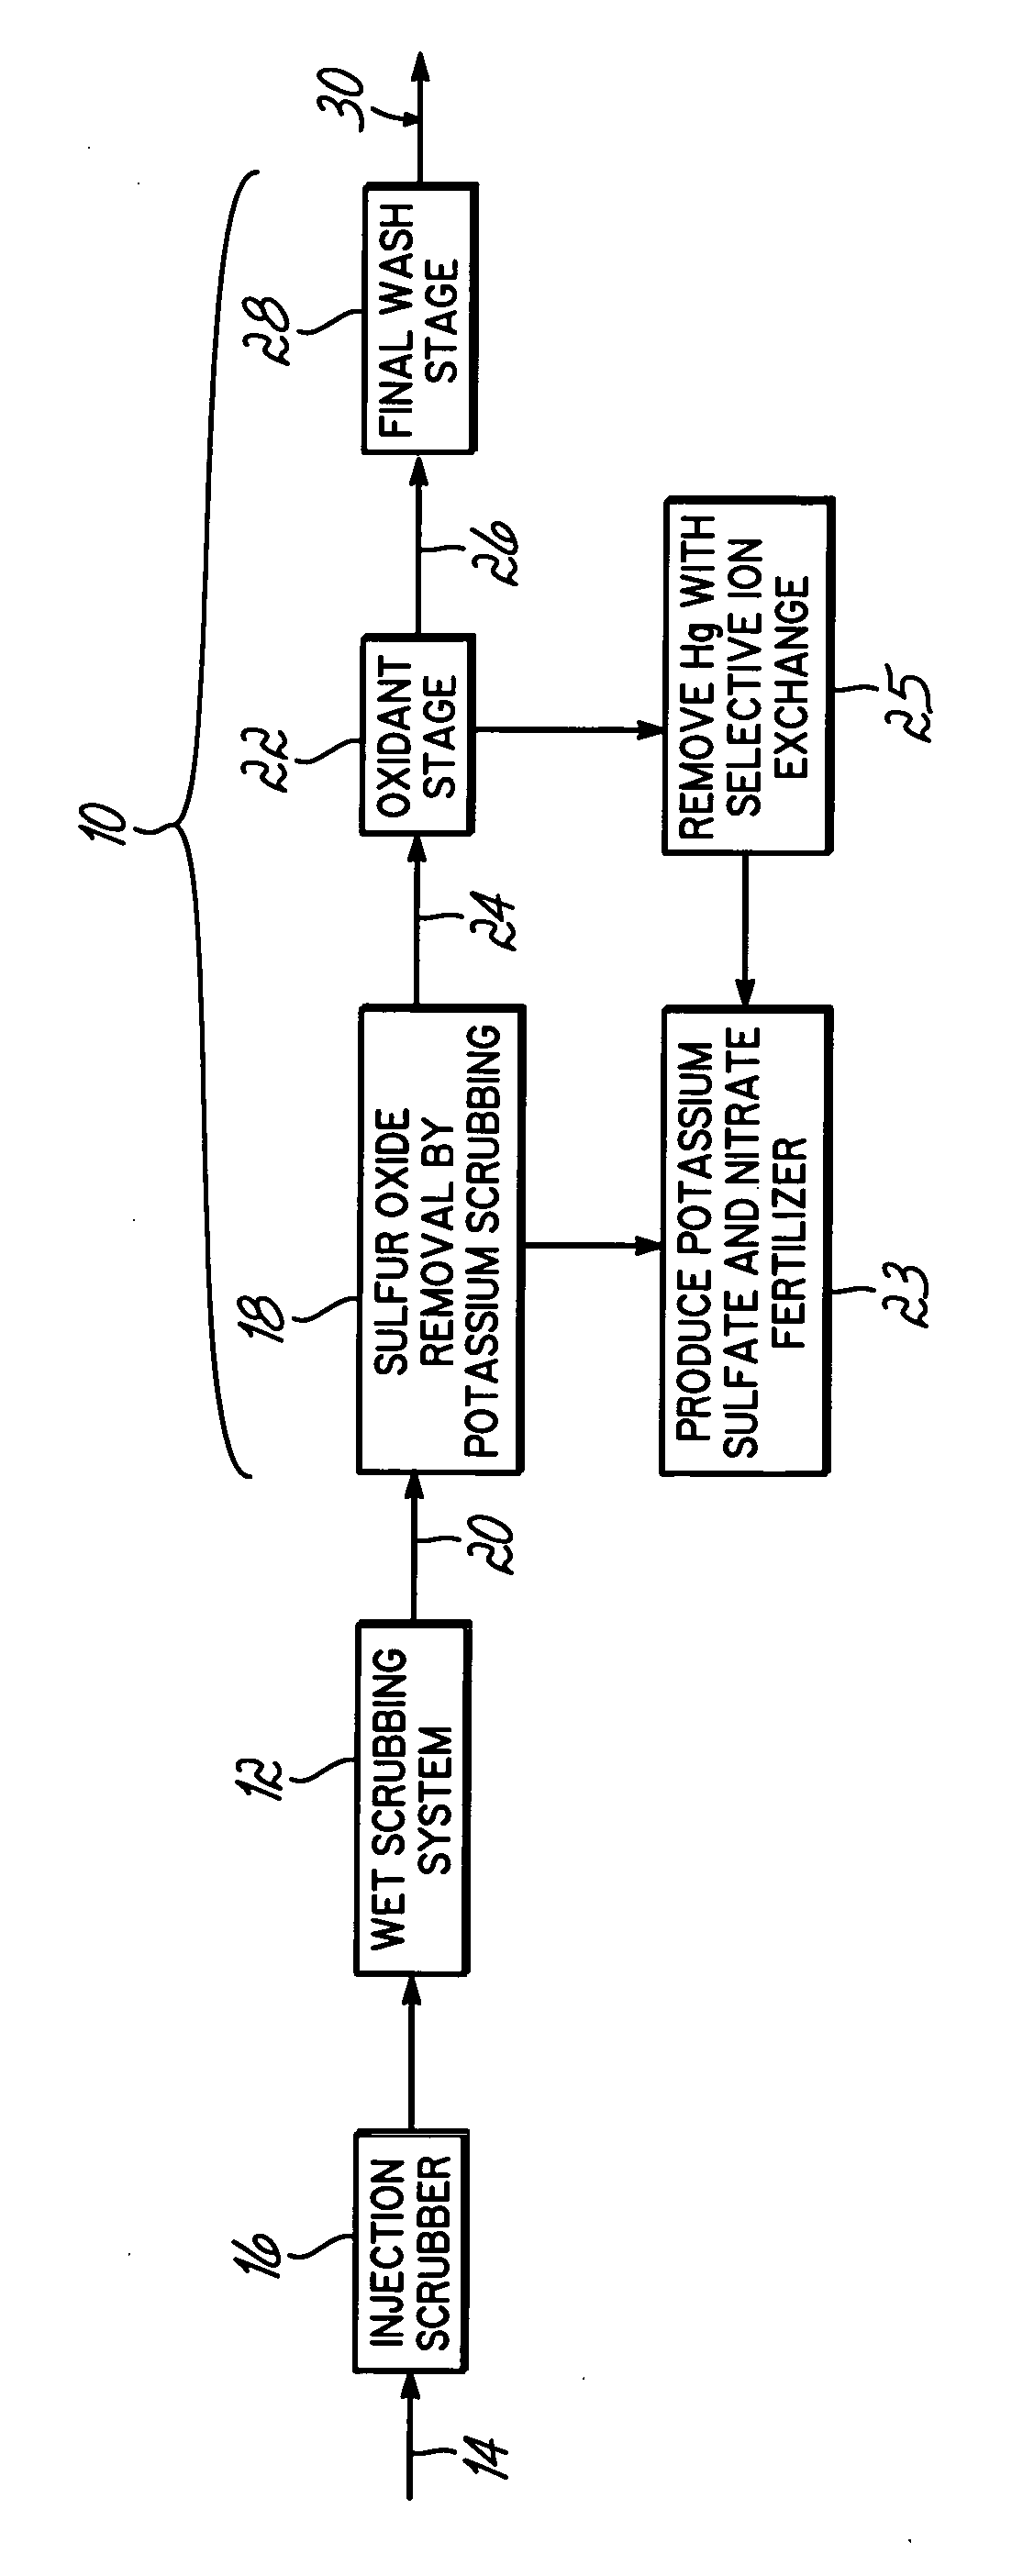 Method for removing sulfur dioxide, mercury, and nitrogen oxides from a gas stream